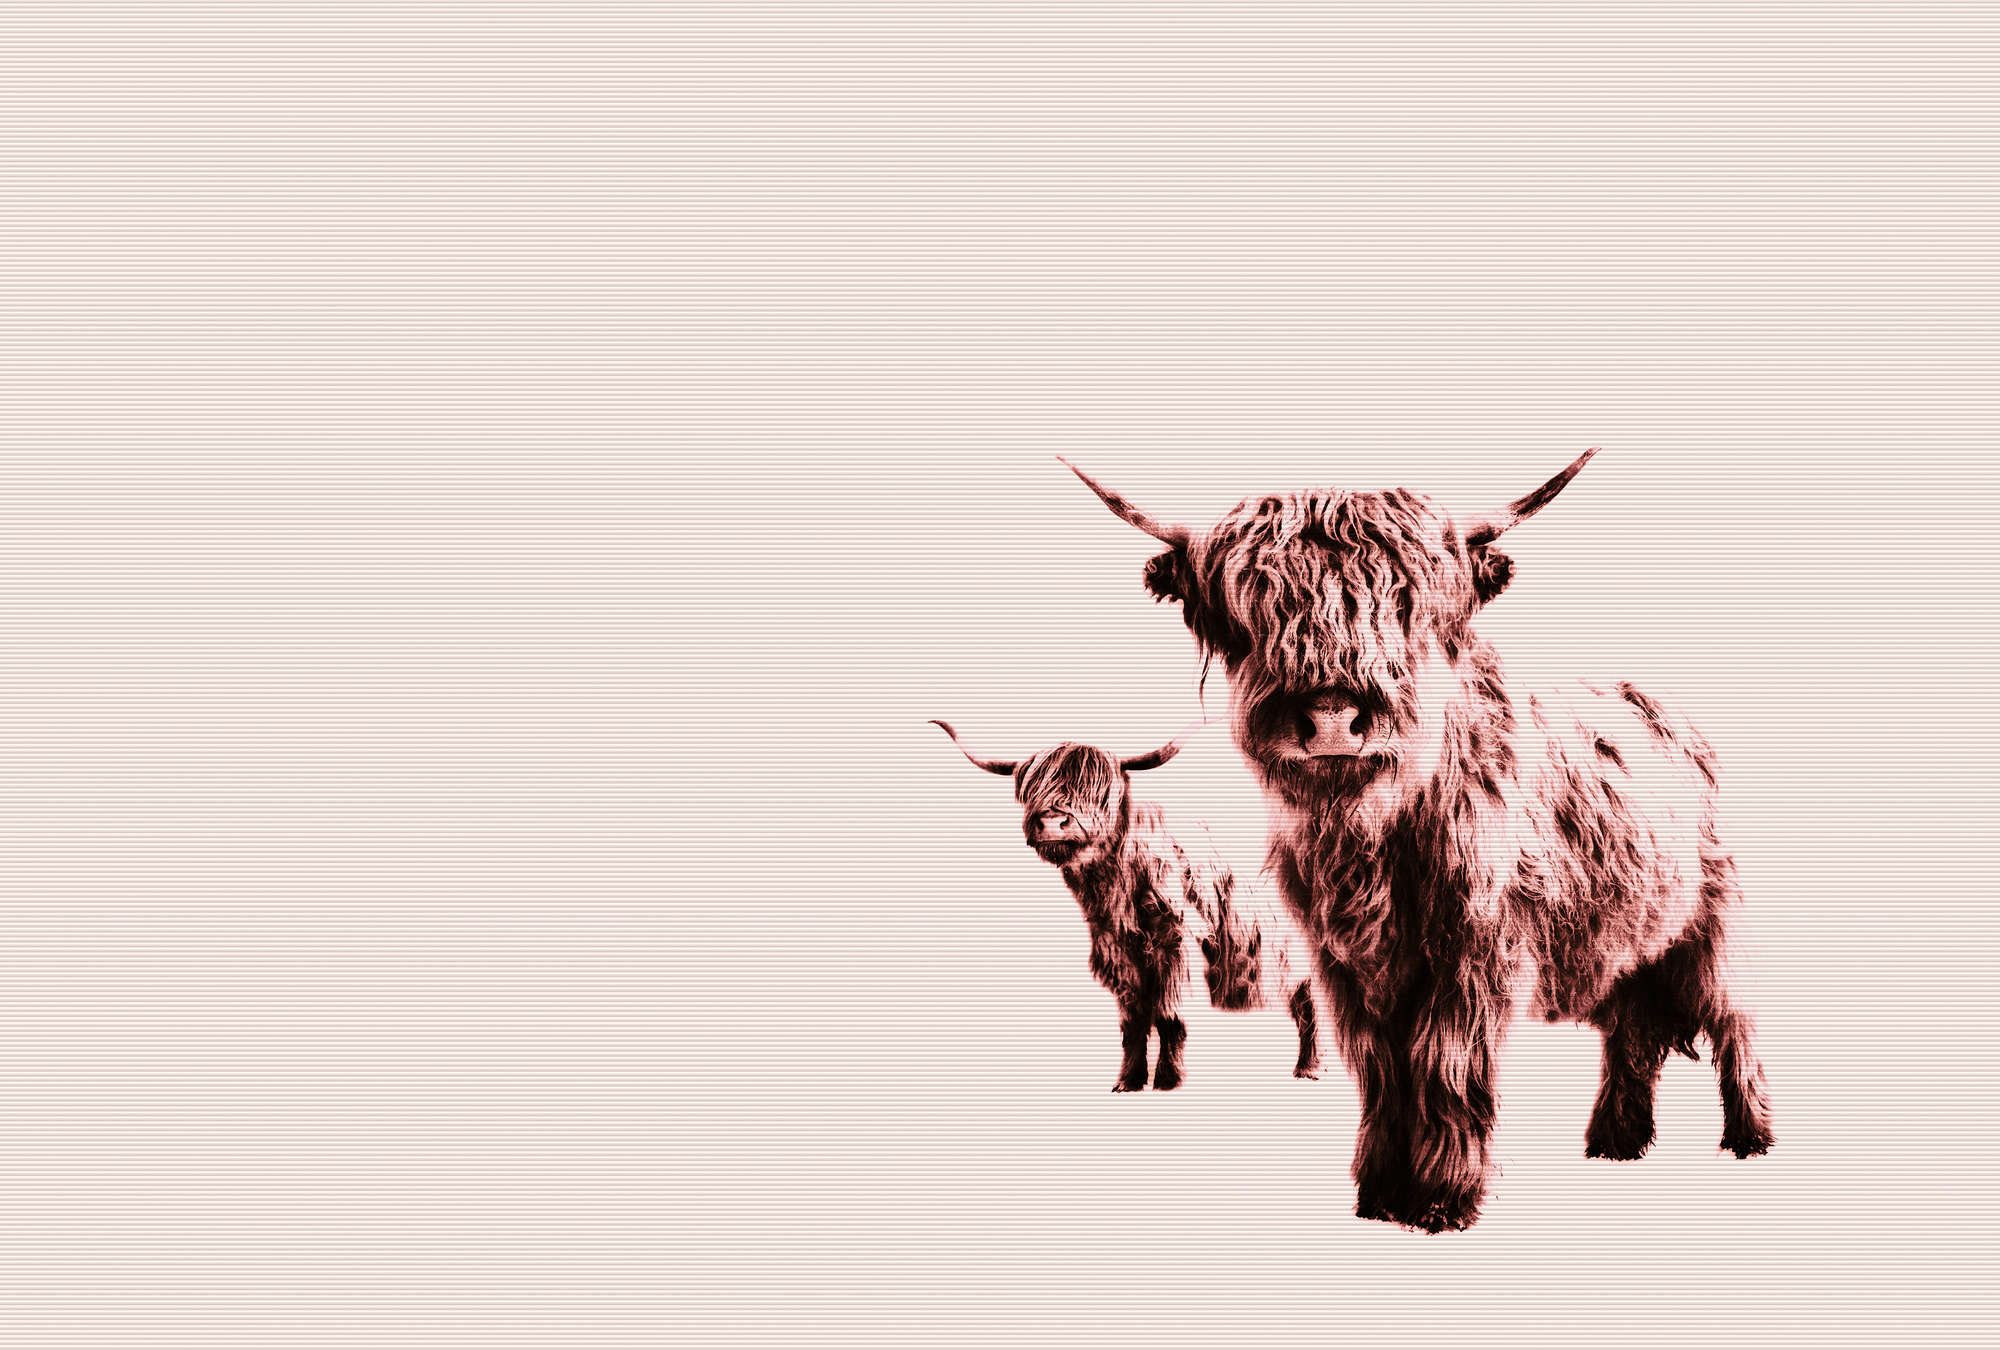             Highland cattle mural with shaggy animal motif
        